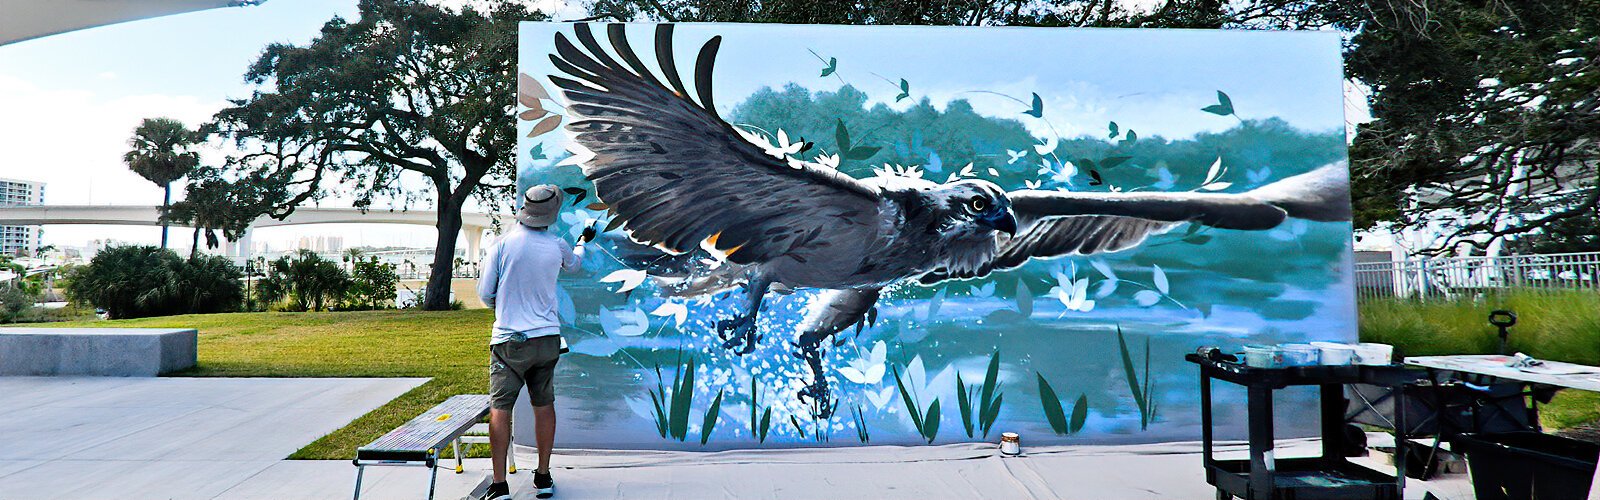 During Art in the Park, Miami-based international muralist Ernesto Maranje works live on a mural at Coachman Park, exploring fauna and flora with brush and spray paint.